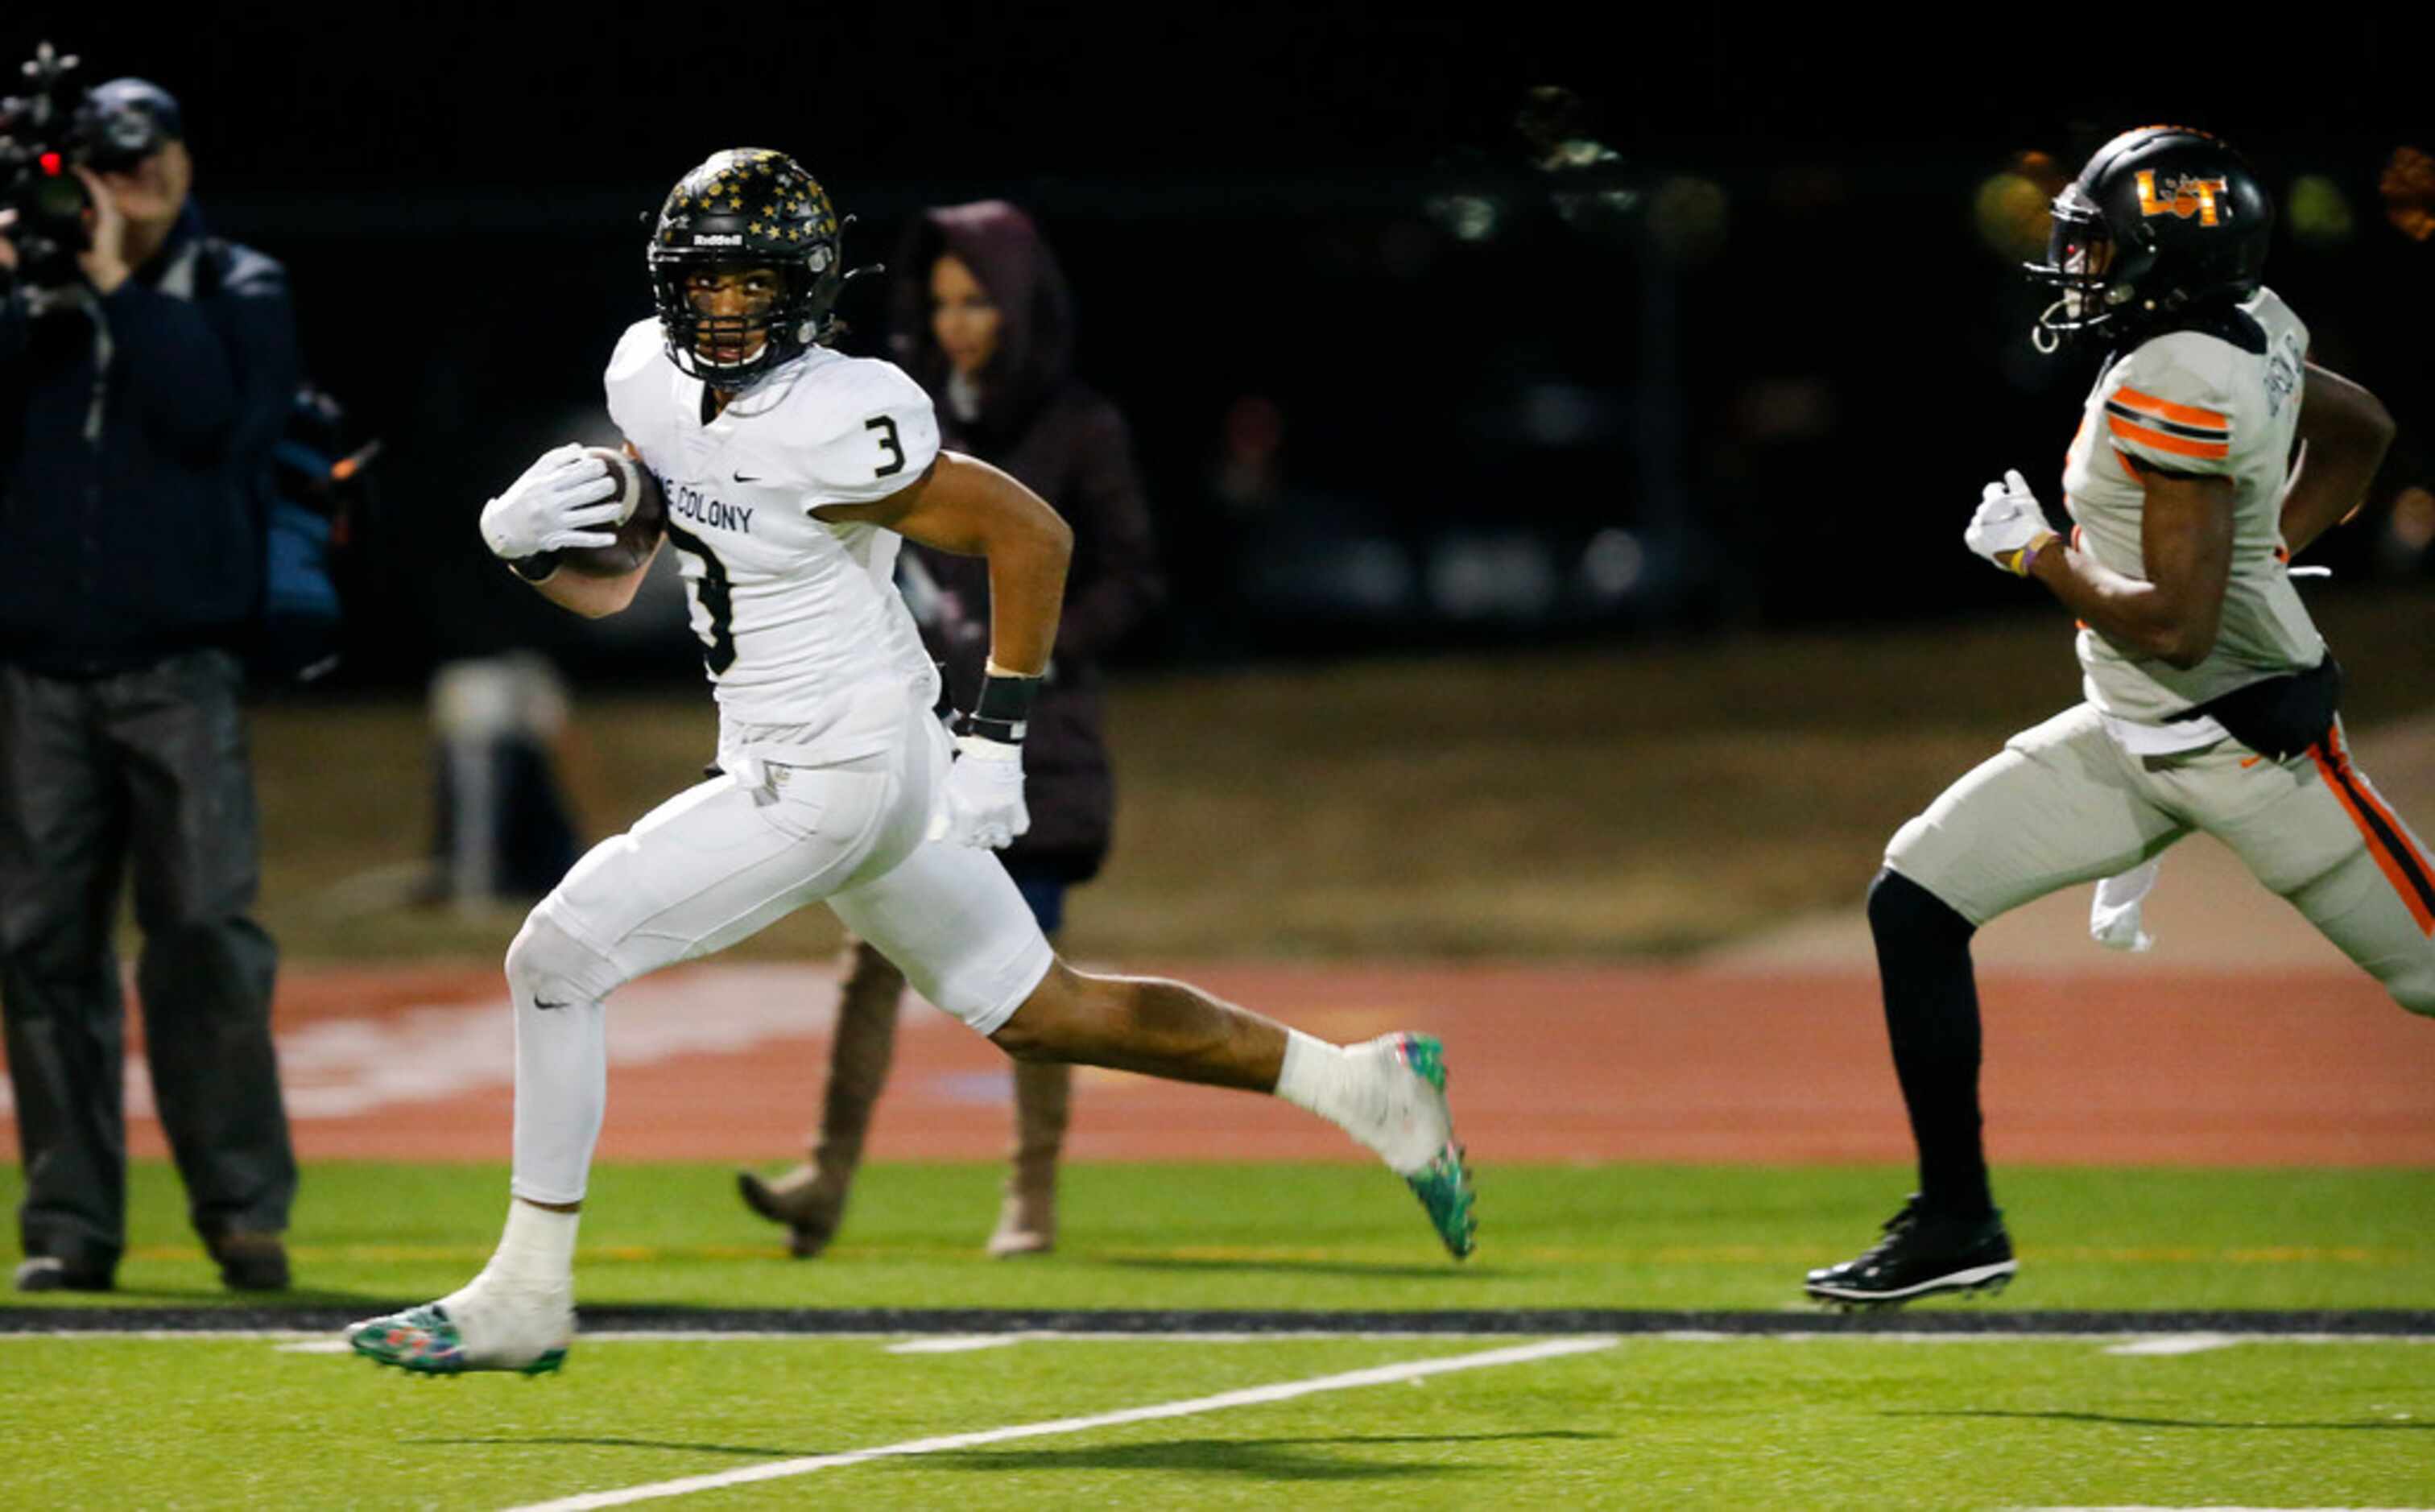 The Colony wide receiver Christian Gonzalez raced away from Lancaster defensive back Lorando...